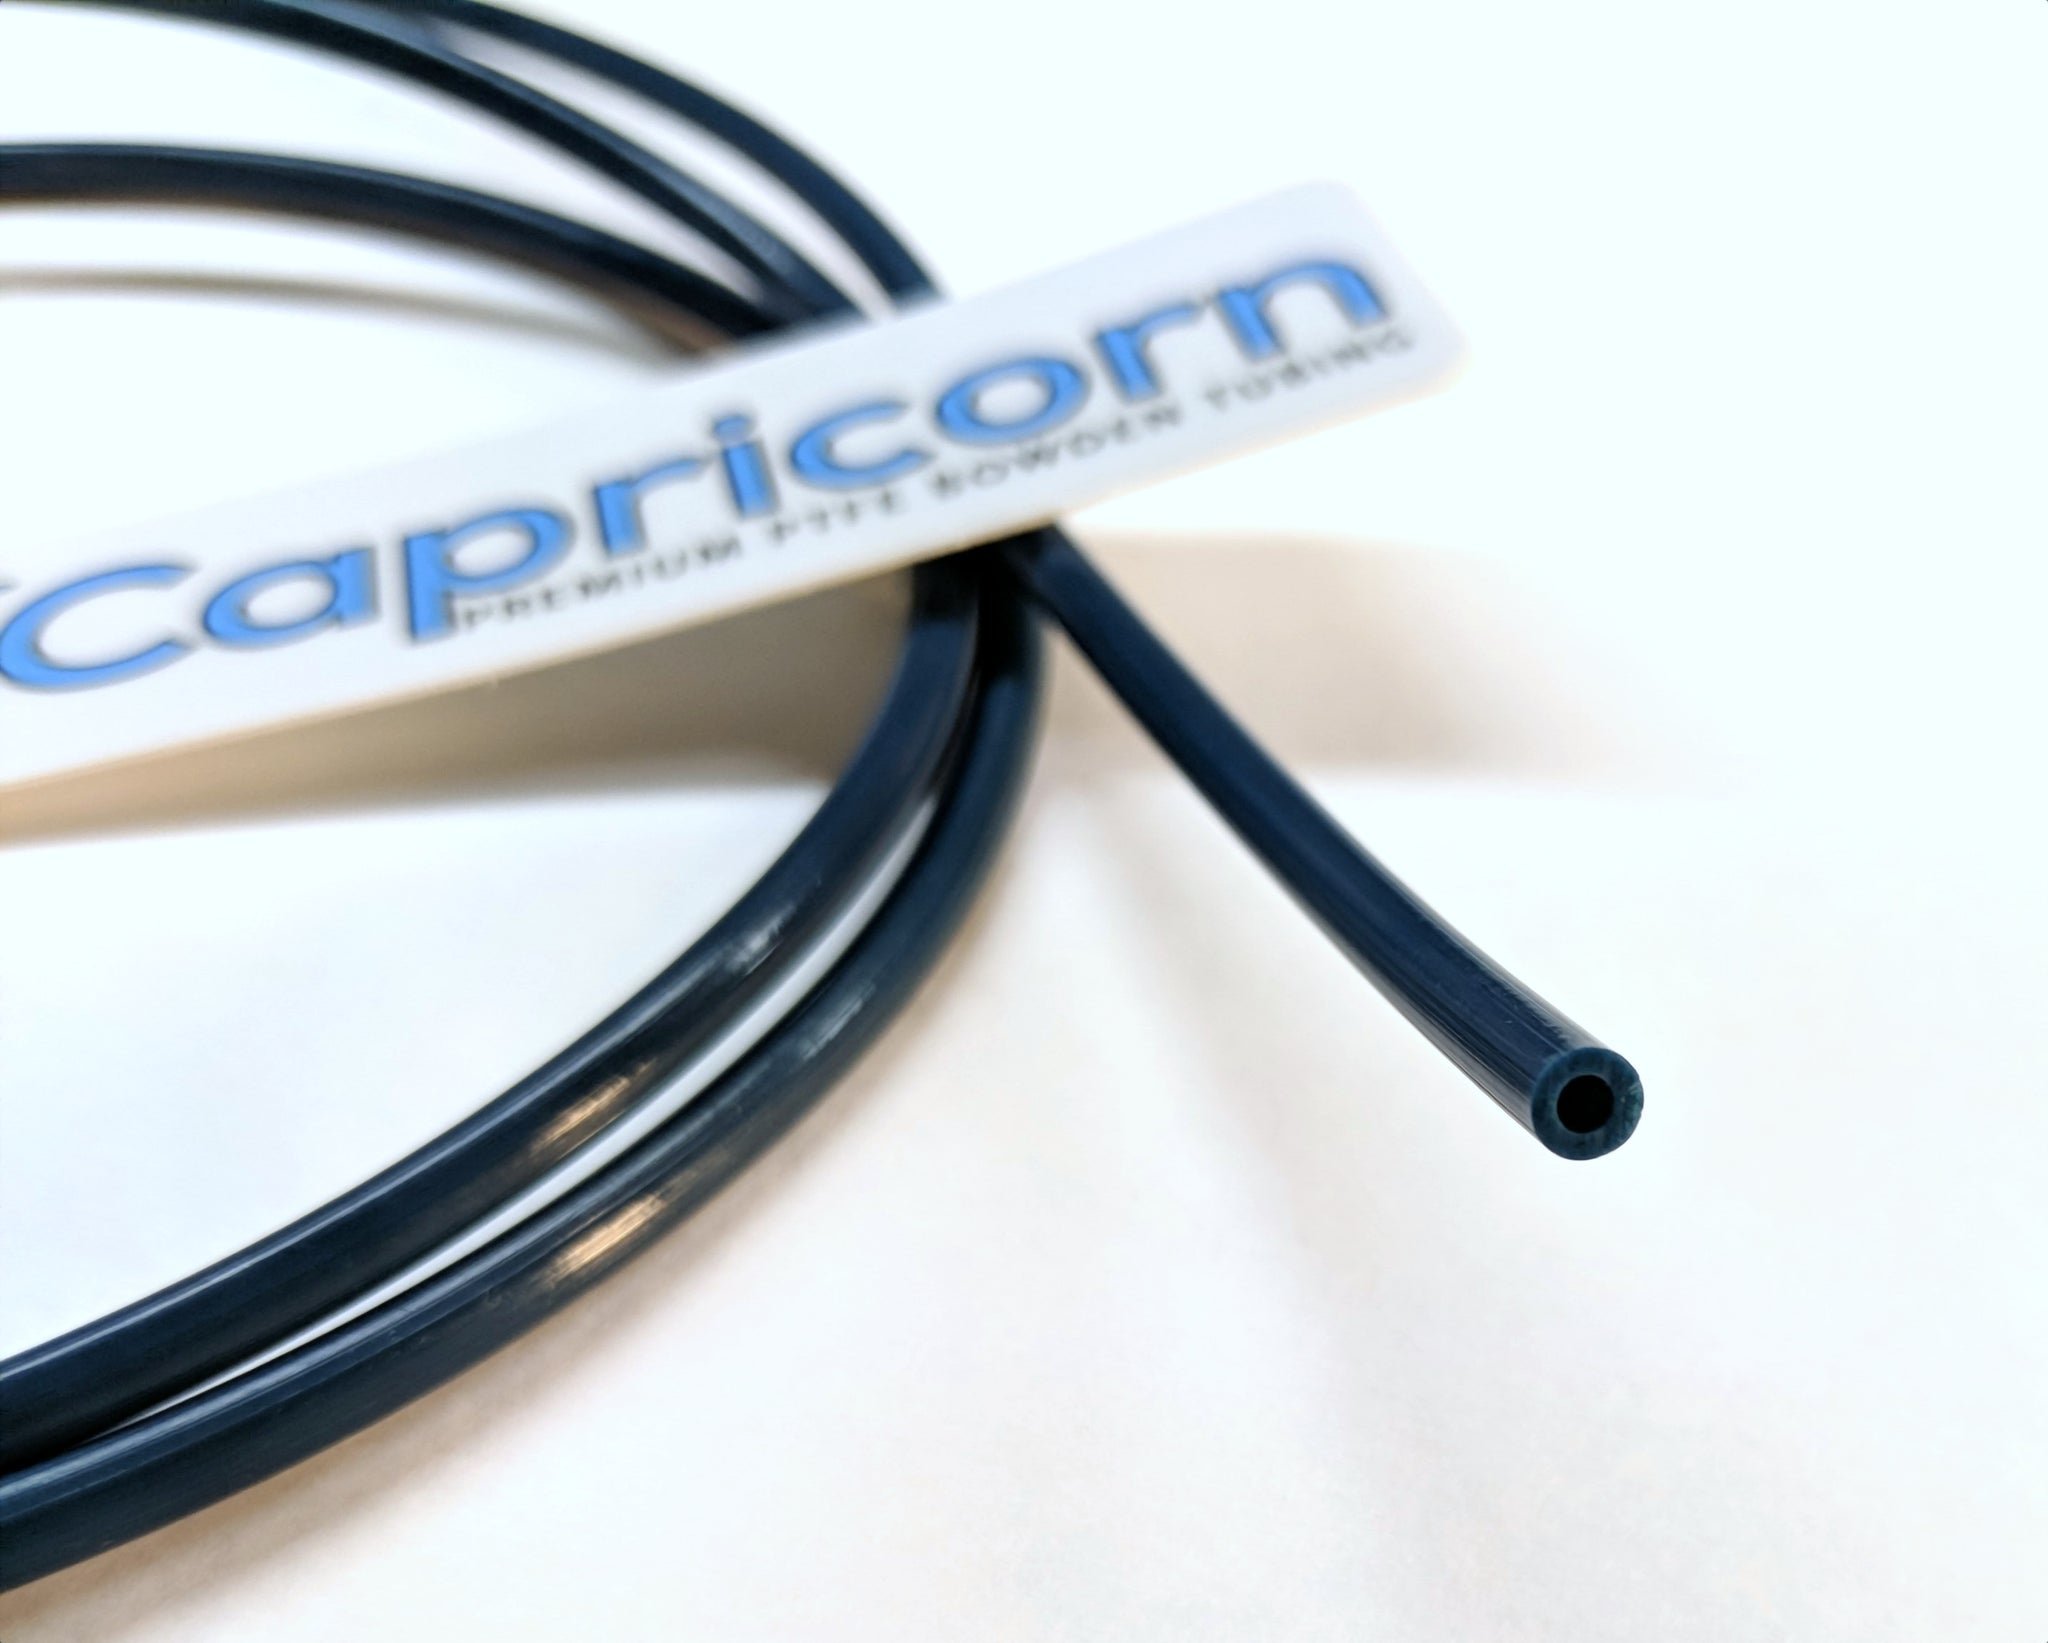 Capricorn 1 Meter XS Low Friction 1.75mm Bowden Tubing –